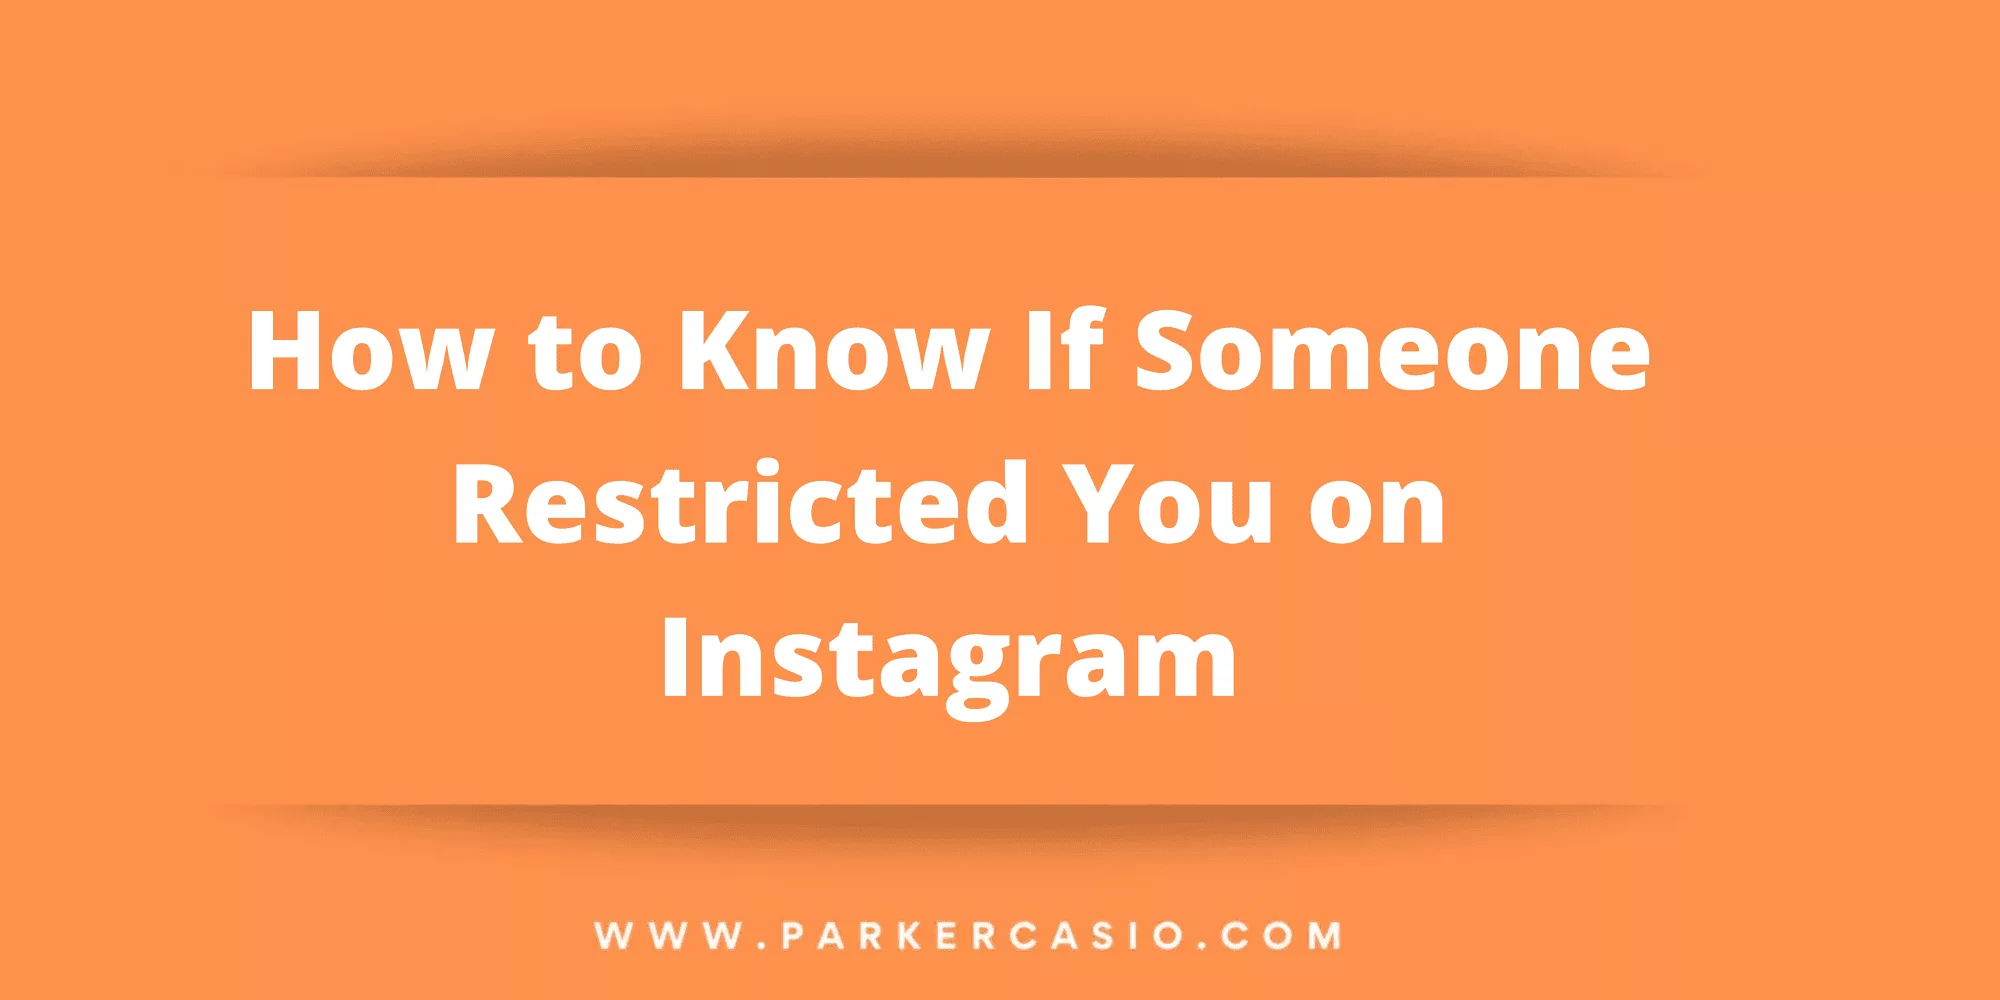 How to Know if Someone Restricted You on Instagram